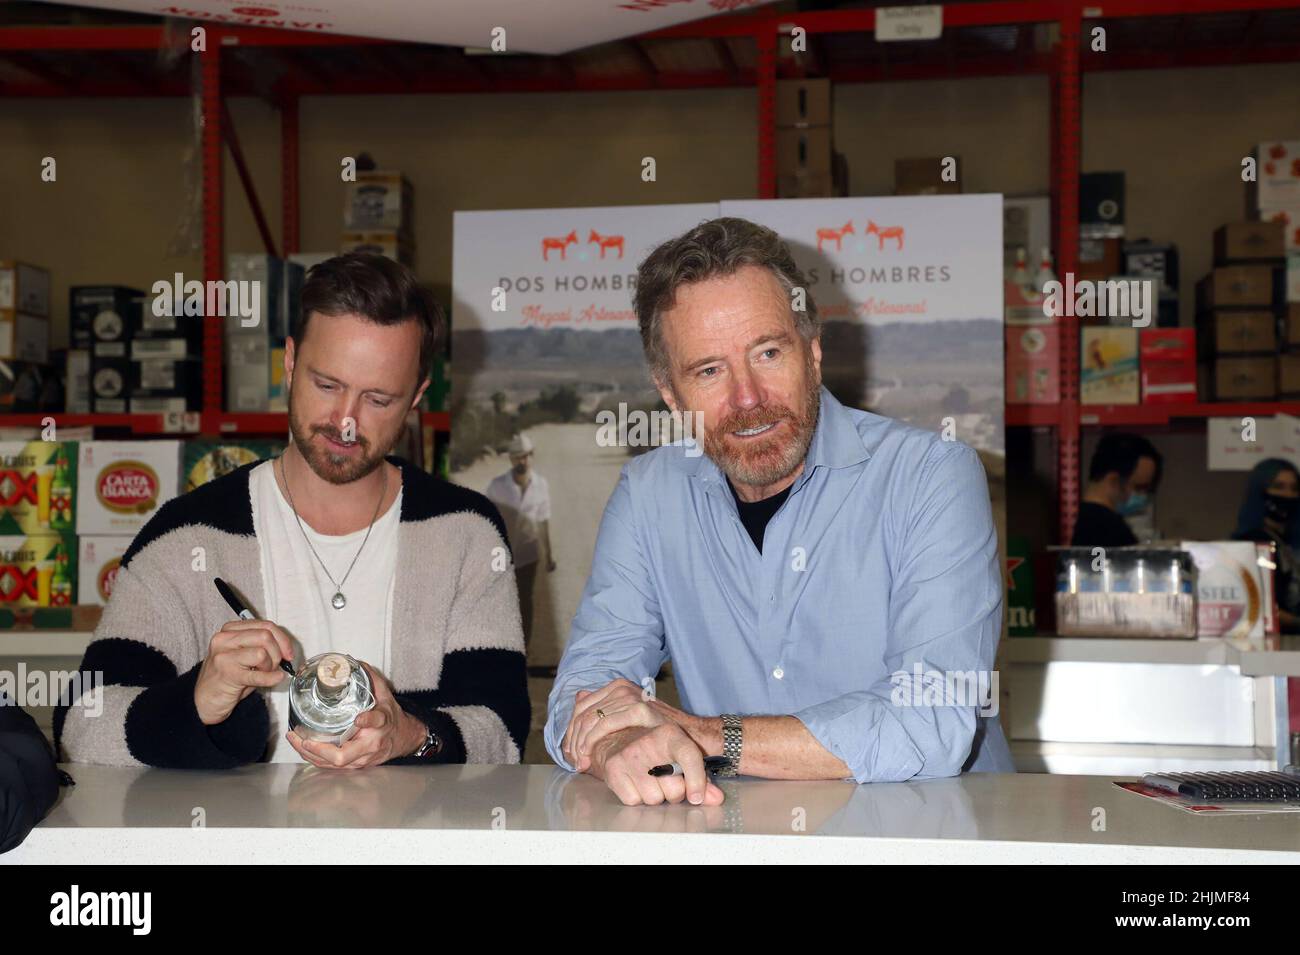 Las Vegas, Nevada, USA. 30th Jan, 2022. Aaron Paul, Bryan Cranston Breaking Bad Stars BRYAN CRANSTON and AARON PAUL Sign Bottles of 'Dos Hombres Mezcal' At In Person Bottle Signing Lee's Discount Liquor  Las Vegas, Nv  January 30, 2022 Credit: ENT/Alamy Live News Stock Photo